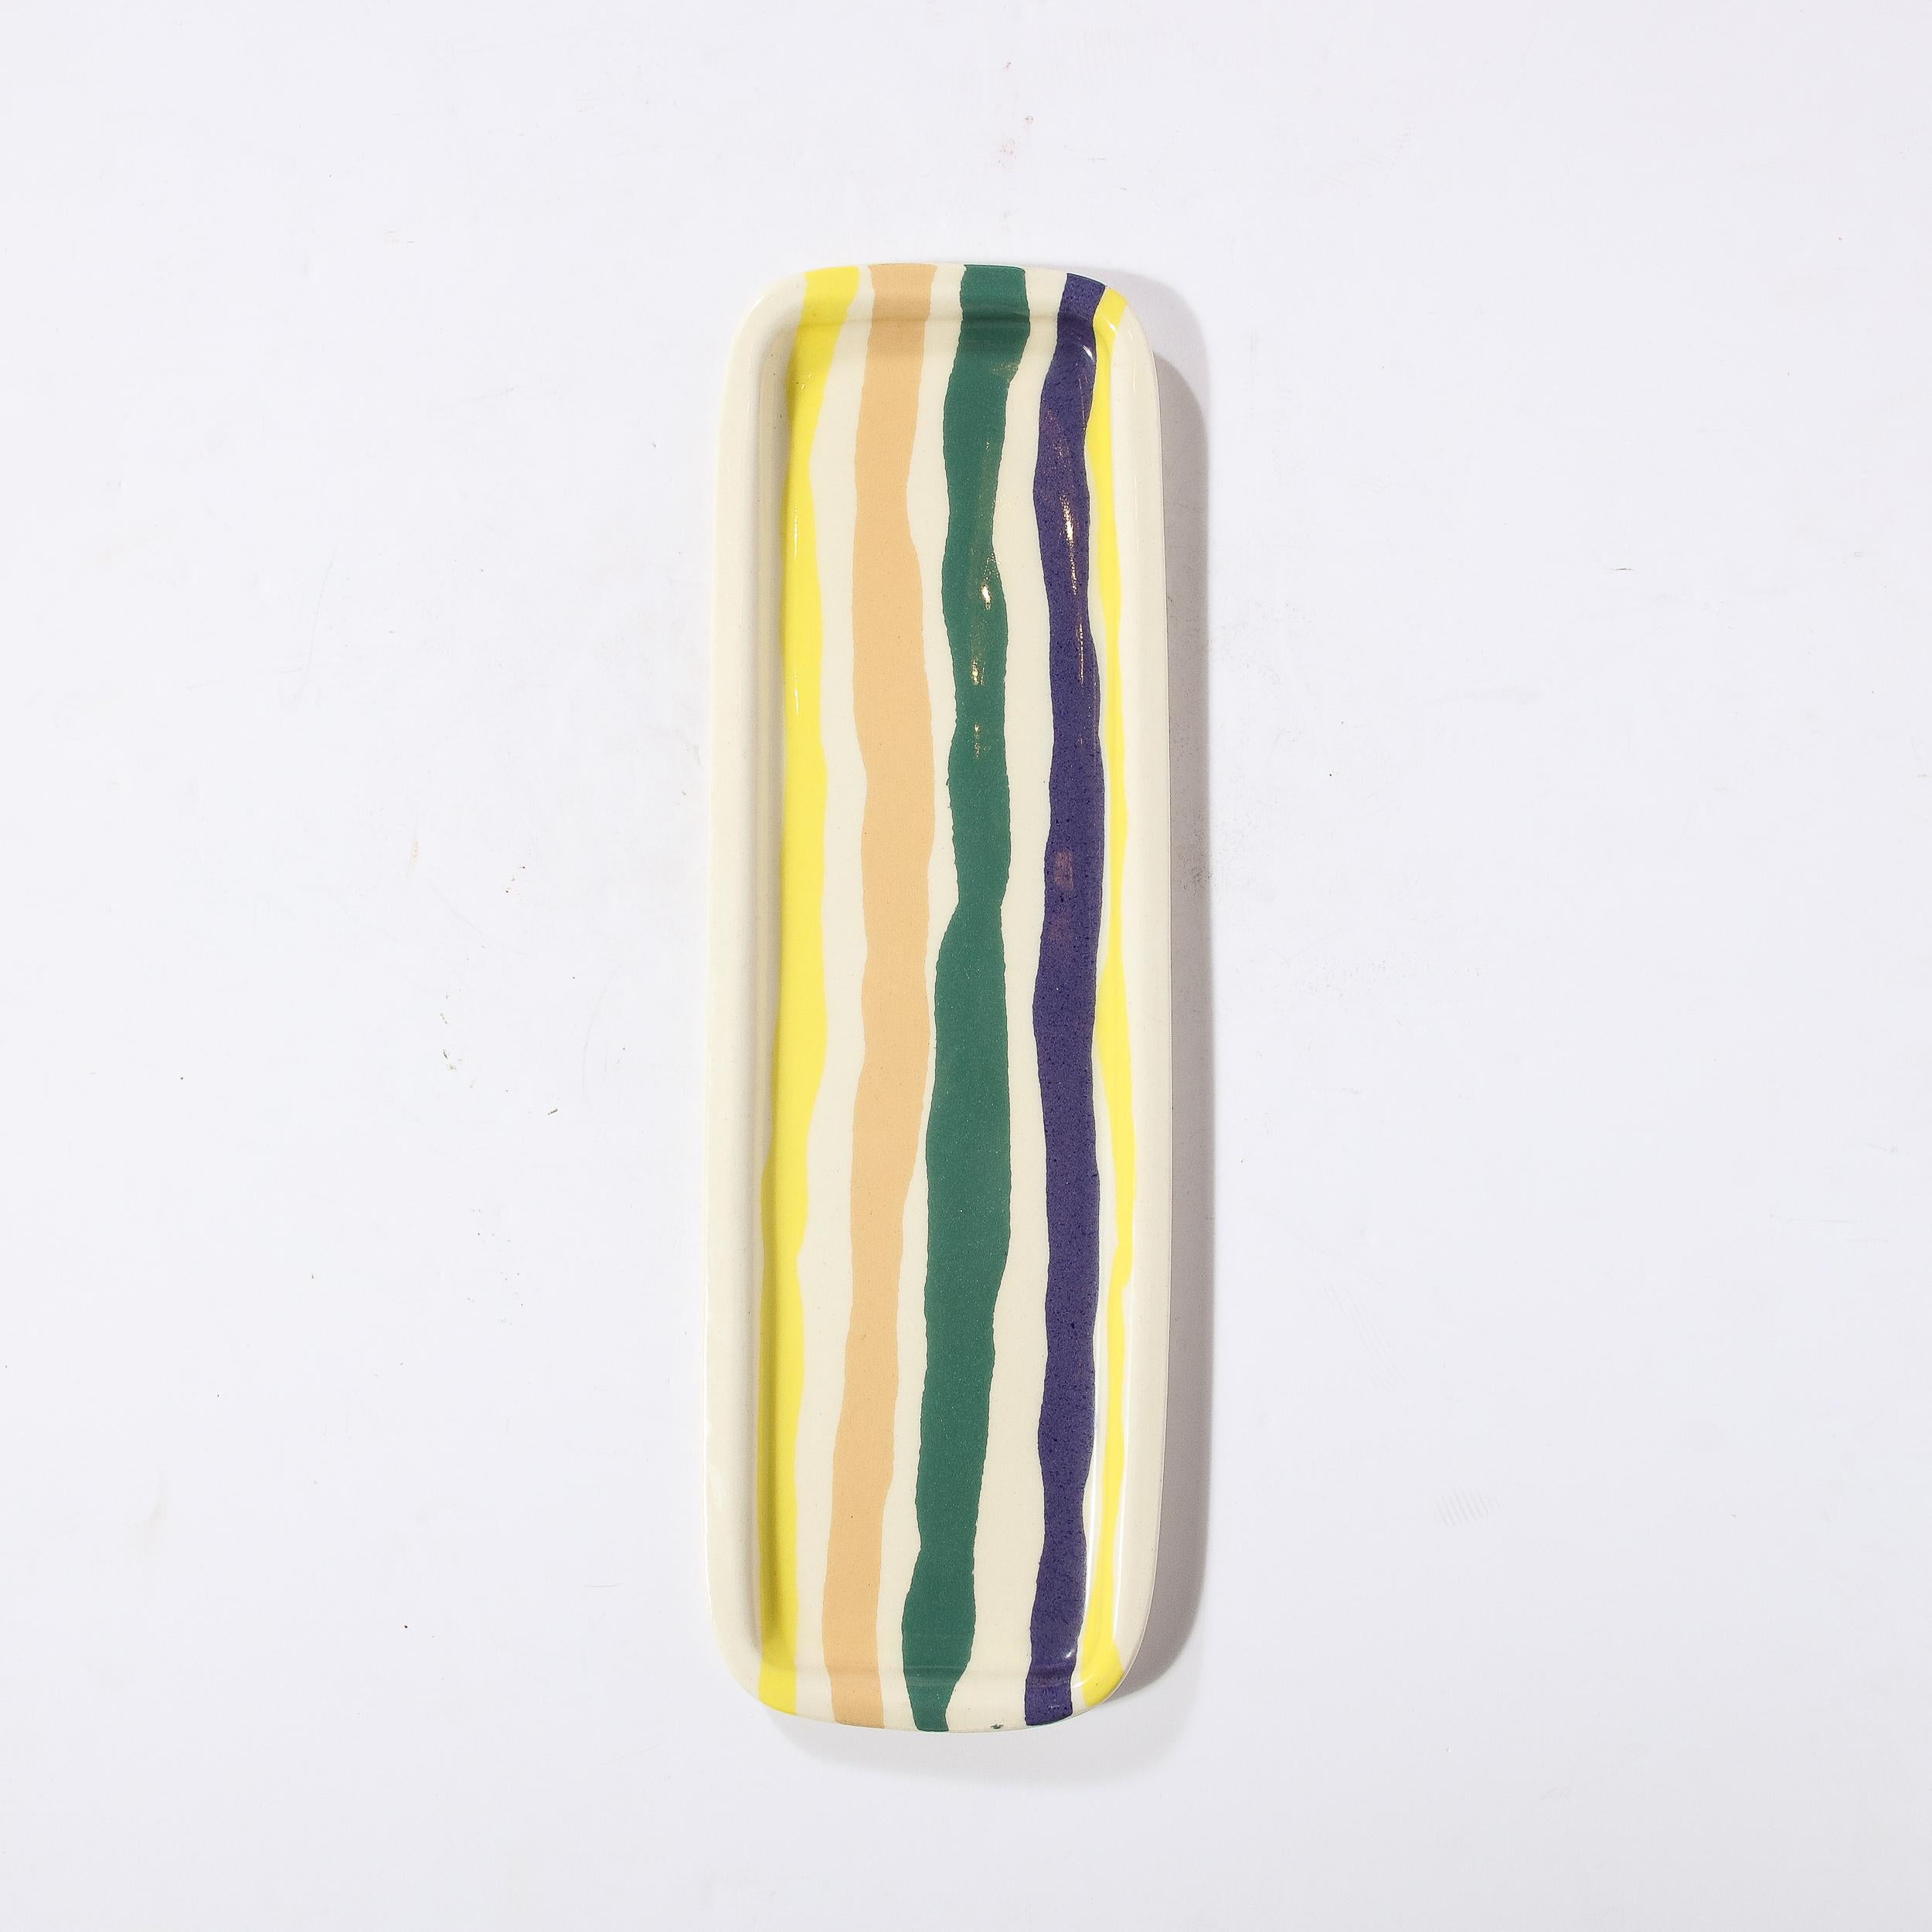 This beautiful elongated modernist serving platter was realized by the esteemed artist Jurg Lanrein in Switzerland during the latter half of the 20th century. It offers a rectangular form with raised sides and hand embellished organic striations